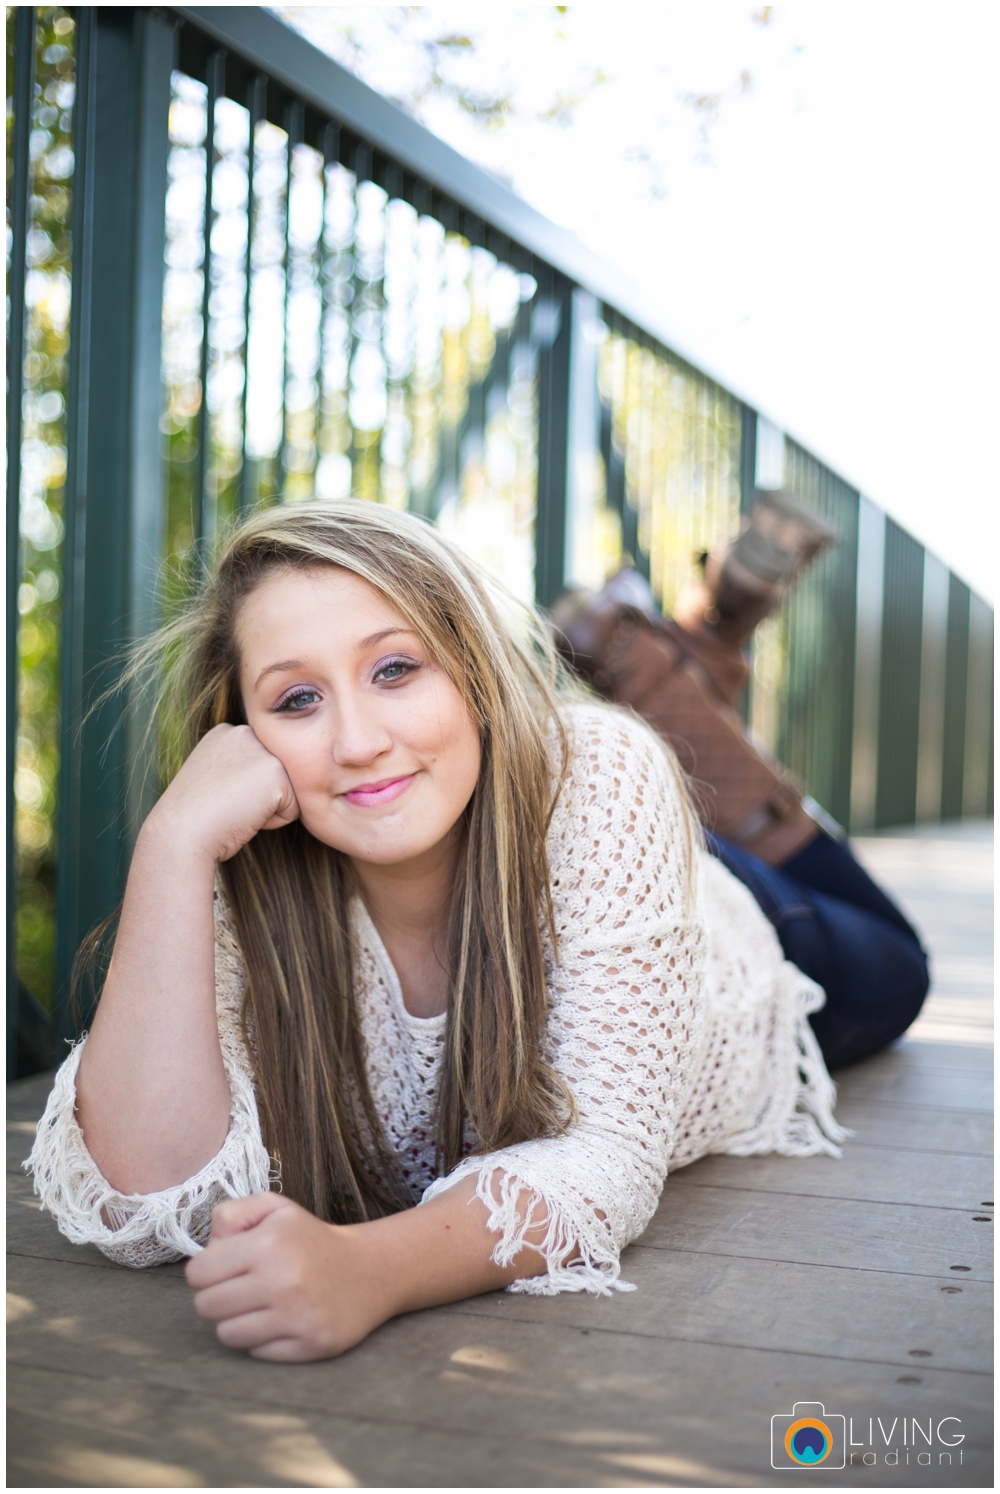 grace-nale-senior-portraits-outdoor-fall-living-radiant-photography-stomped_0012.jpg